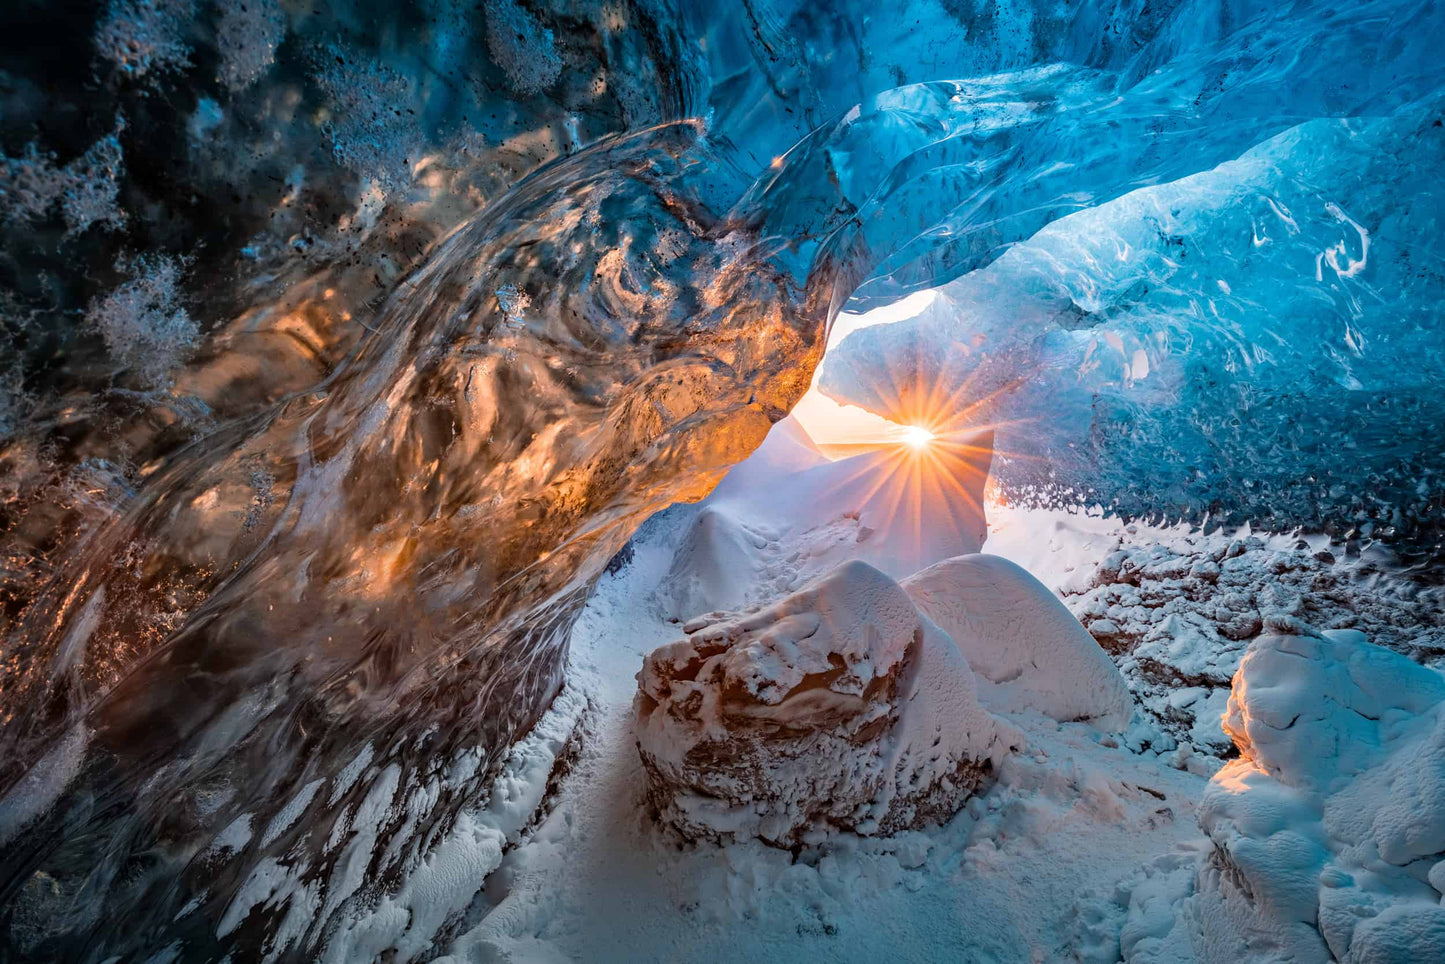 The artpiece 'Dawn of the Cavern' by Markus van Hauten showing a black and bright blue ice cave, with only one light of in the distance.